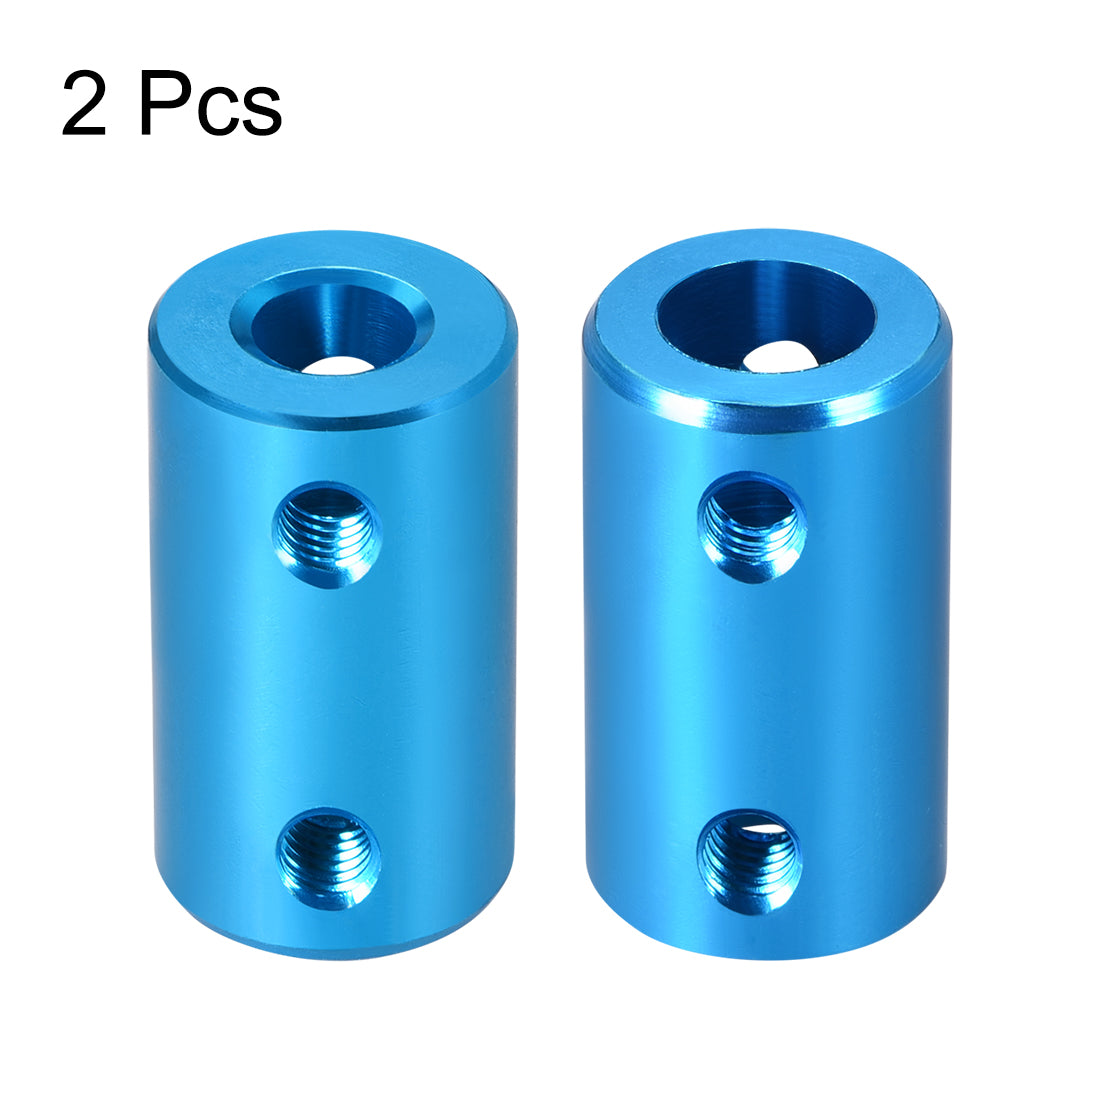 uxcell Uxcell Shaft Coupling 6mm to 8mm Bore L25xD14 Robot Motor Wheel Rigid  Connector Blue 2 Pcs